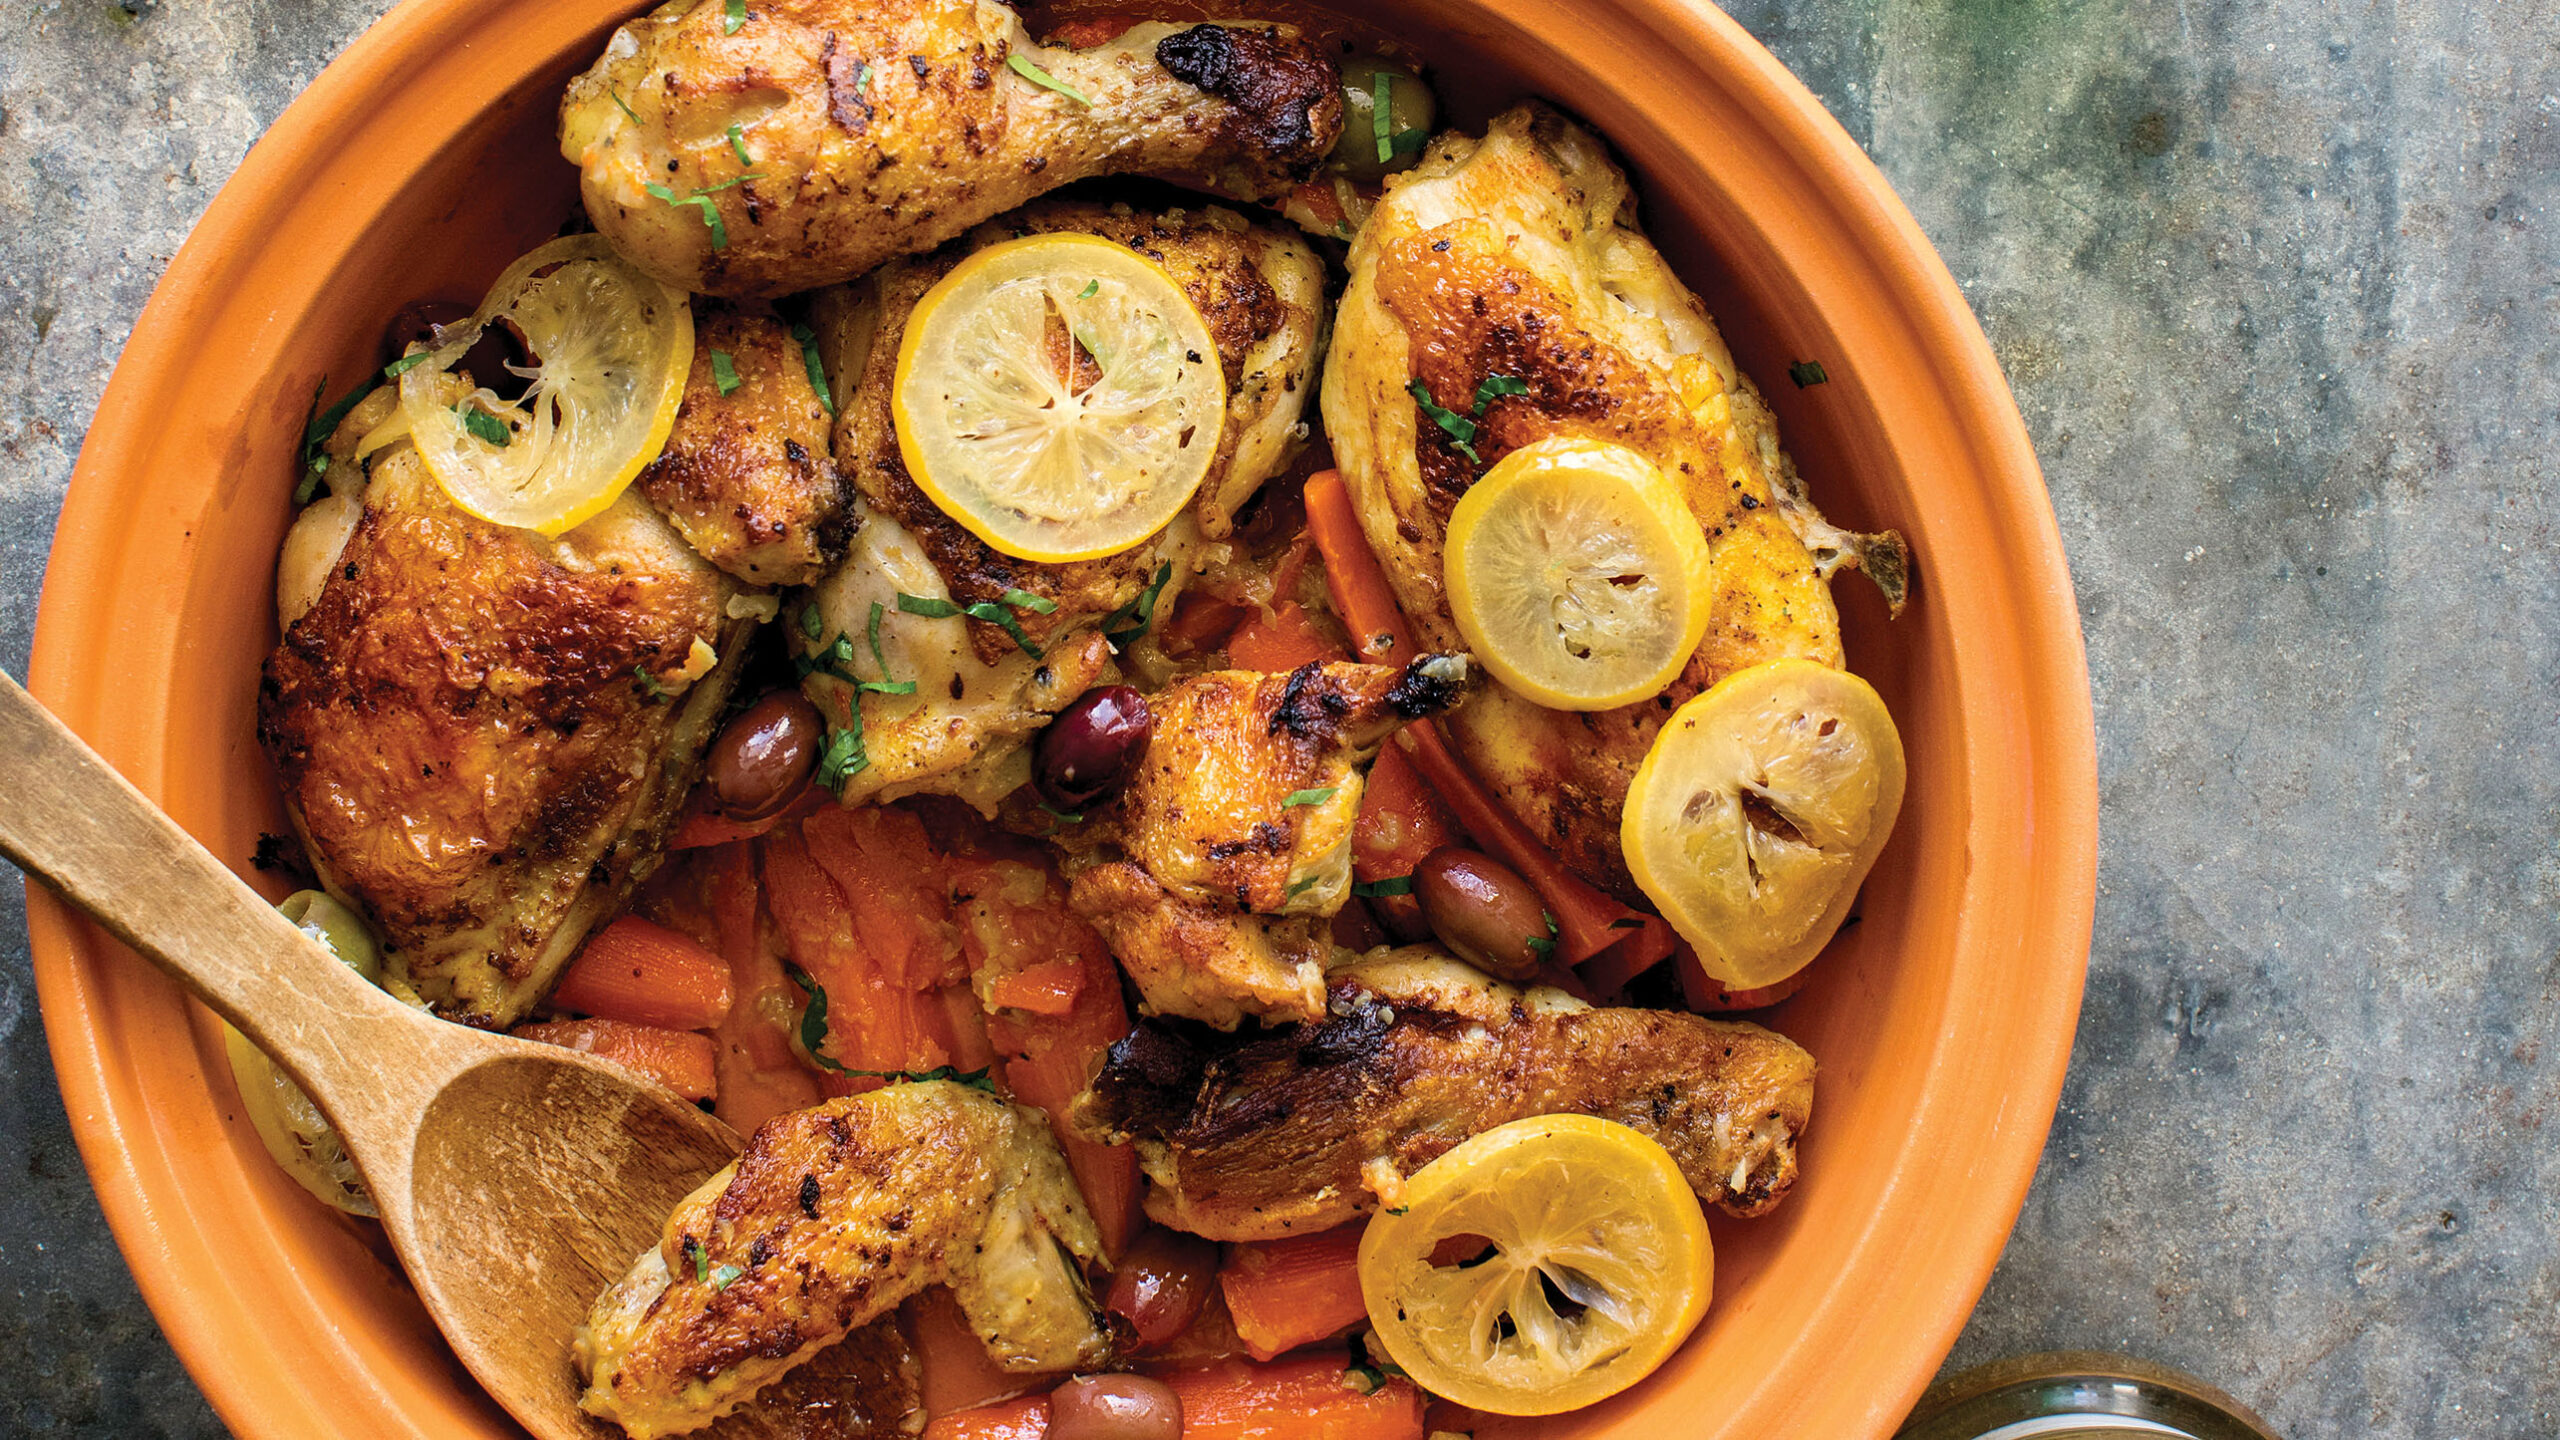 Chicken Tagine recipe Excerpted from Heirloom Kitchen: Heritage Recipes and Family Stories from the Tables of Immigrant Women by Anna Francese Gass © 2019 Anna Francese Gass. Photos © 2019 by Andrew Scrivani